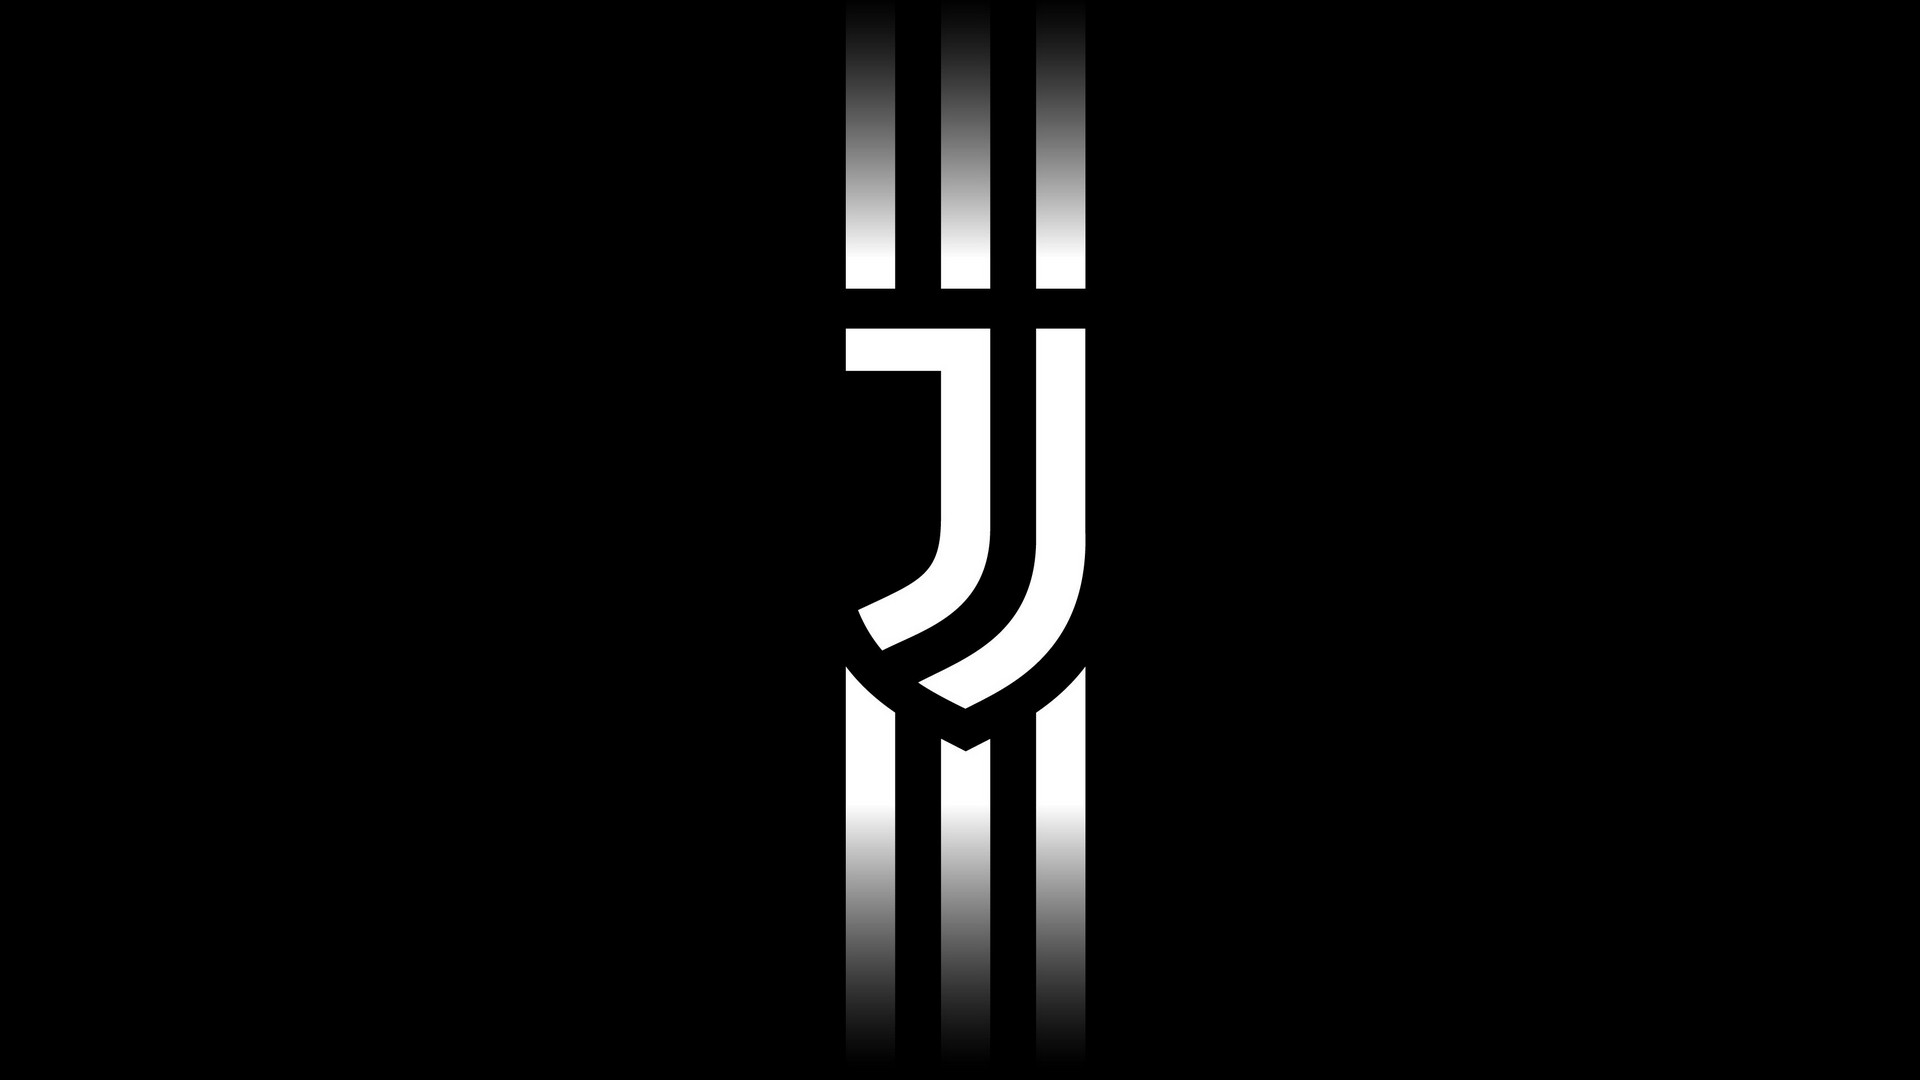 HD Juventus Soccer Backgrounds With Resolution 1920X1080 pixel. You can make this wallpaper for your Mac or Windows Desktop Background, iPhone, Android or Tablet and another Smartphone device for free